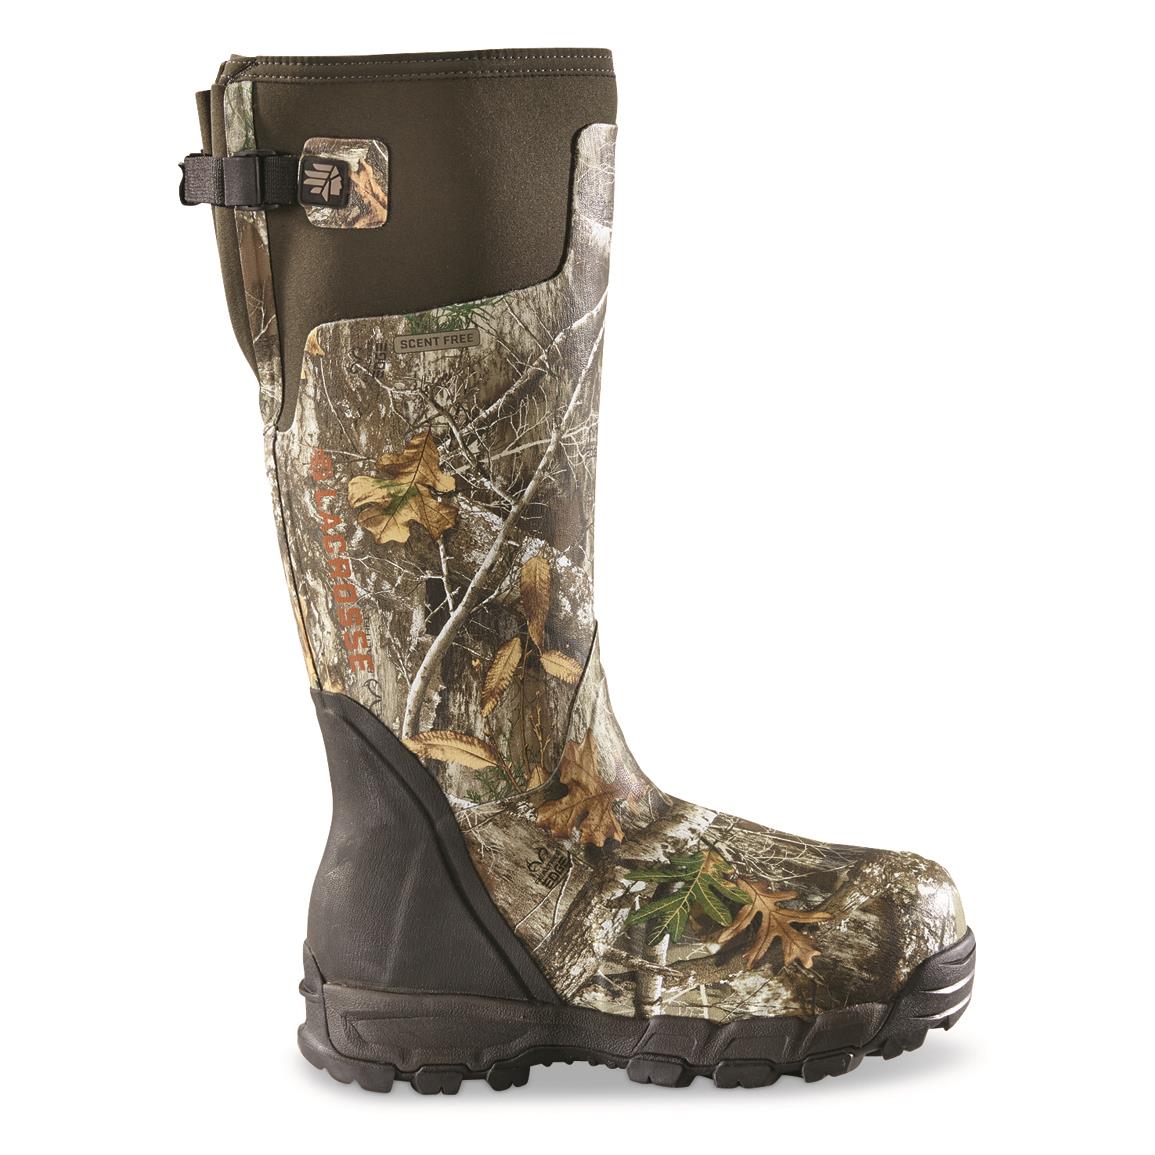 lacrosse men's hunting boots